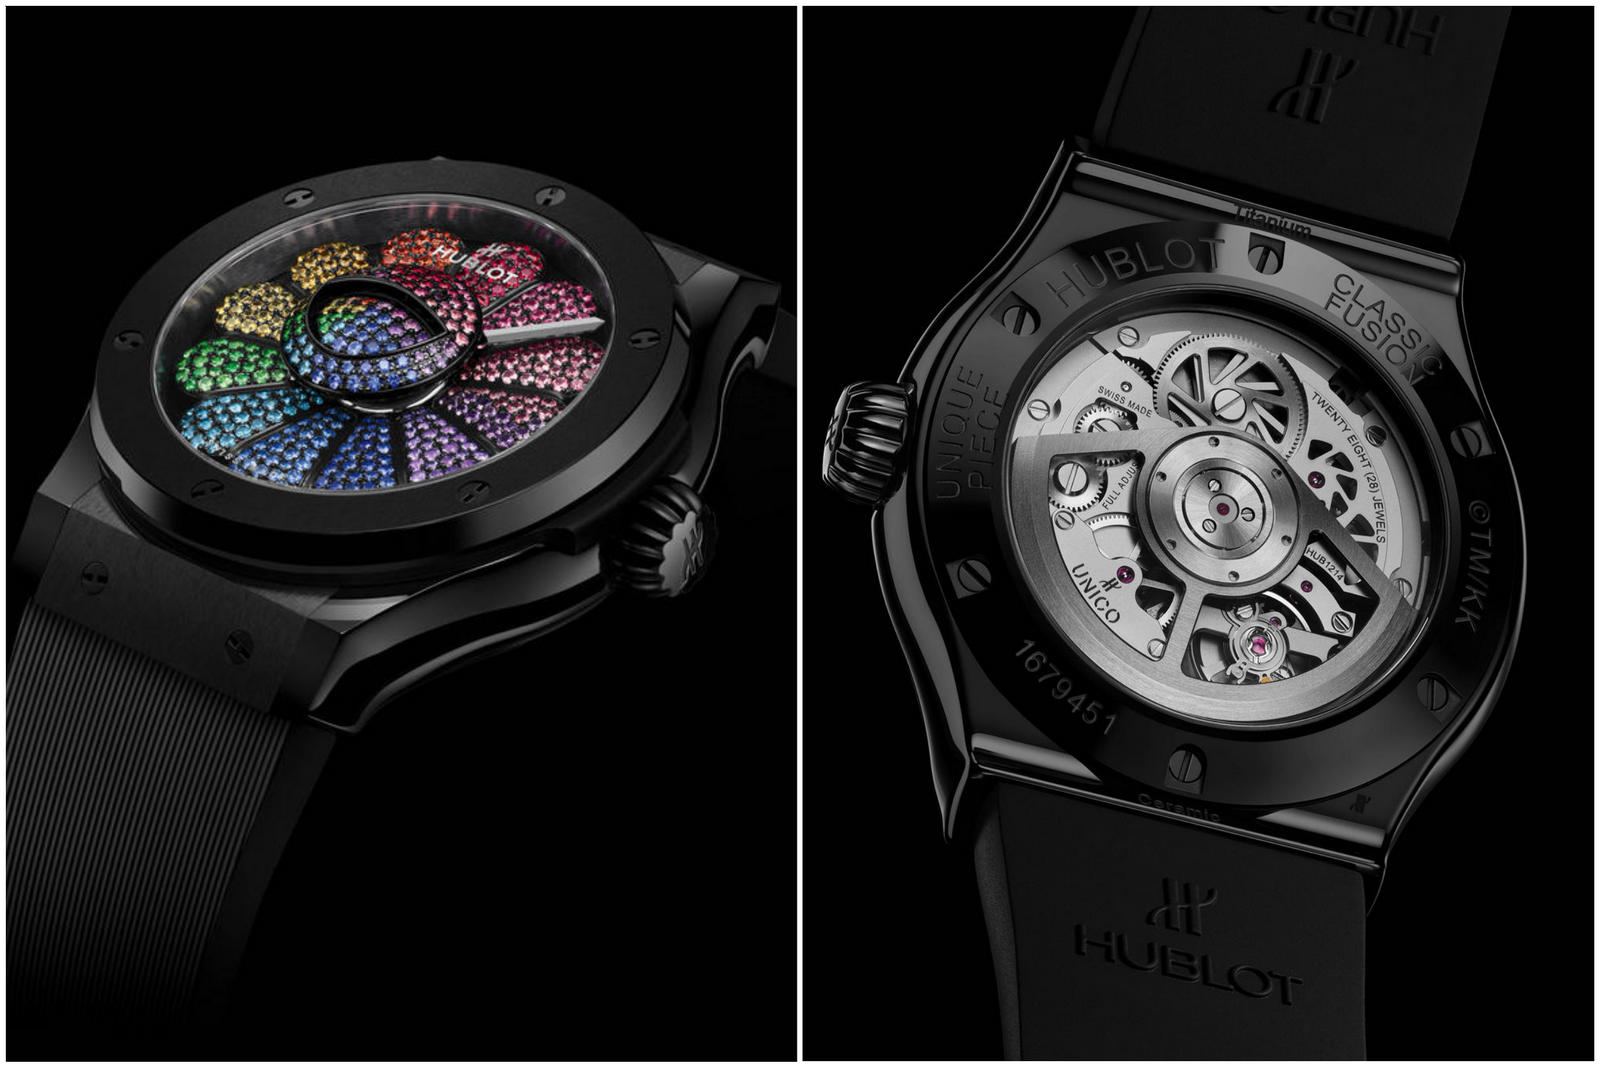 Hublot To Introduce 13 Unique Classic Fusion Murakami Watches With